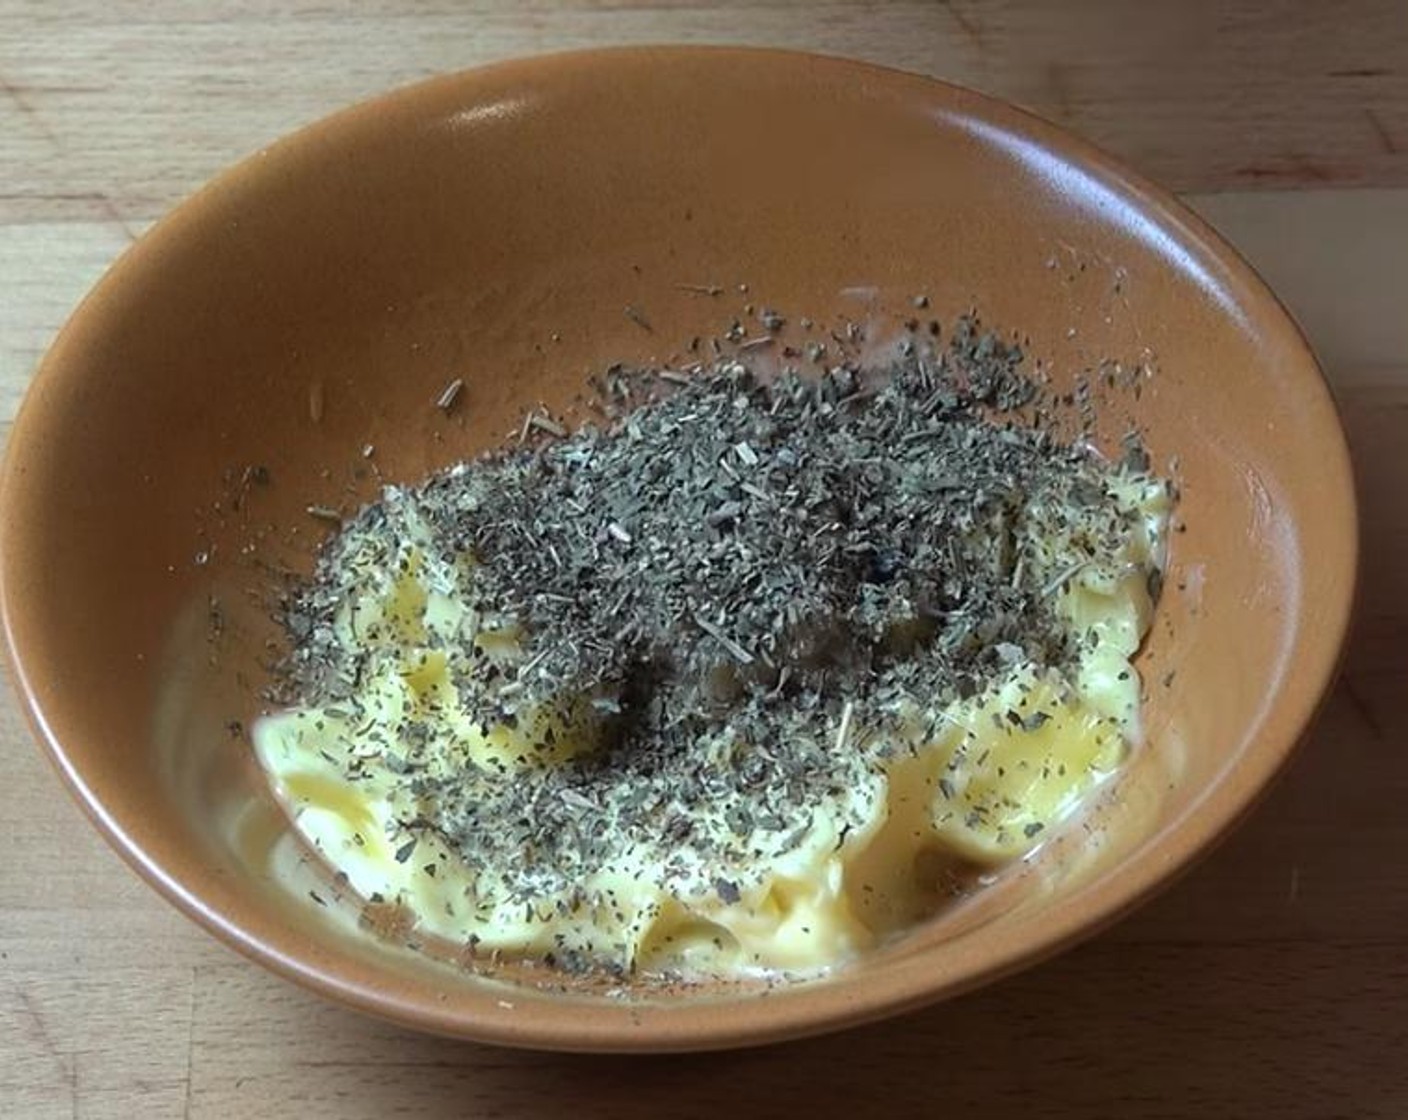 step 1 Mix Butter (1/4 cup), Garlic (1 clove), and Dried Mixed Herbs (1 tsp) in a small bowl until well combined.